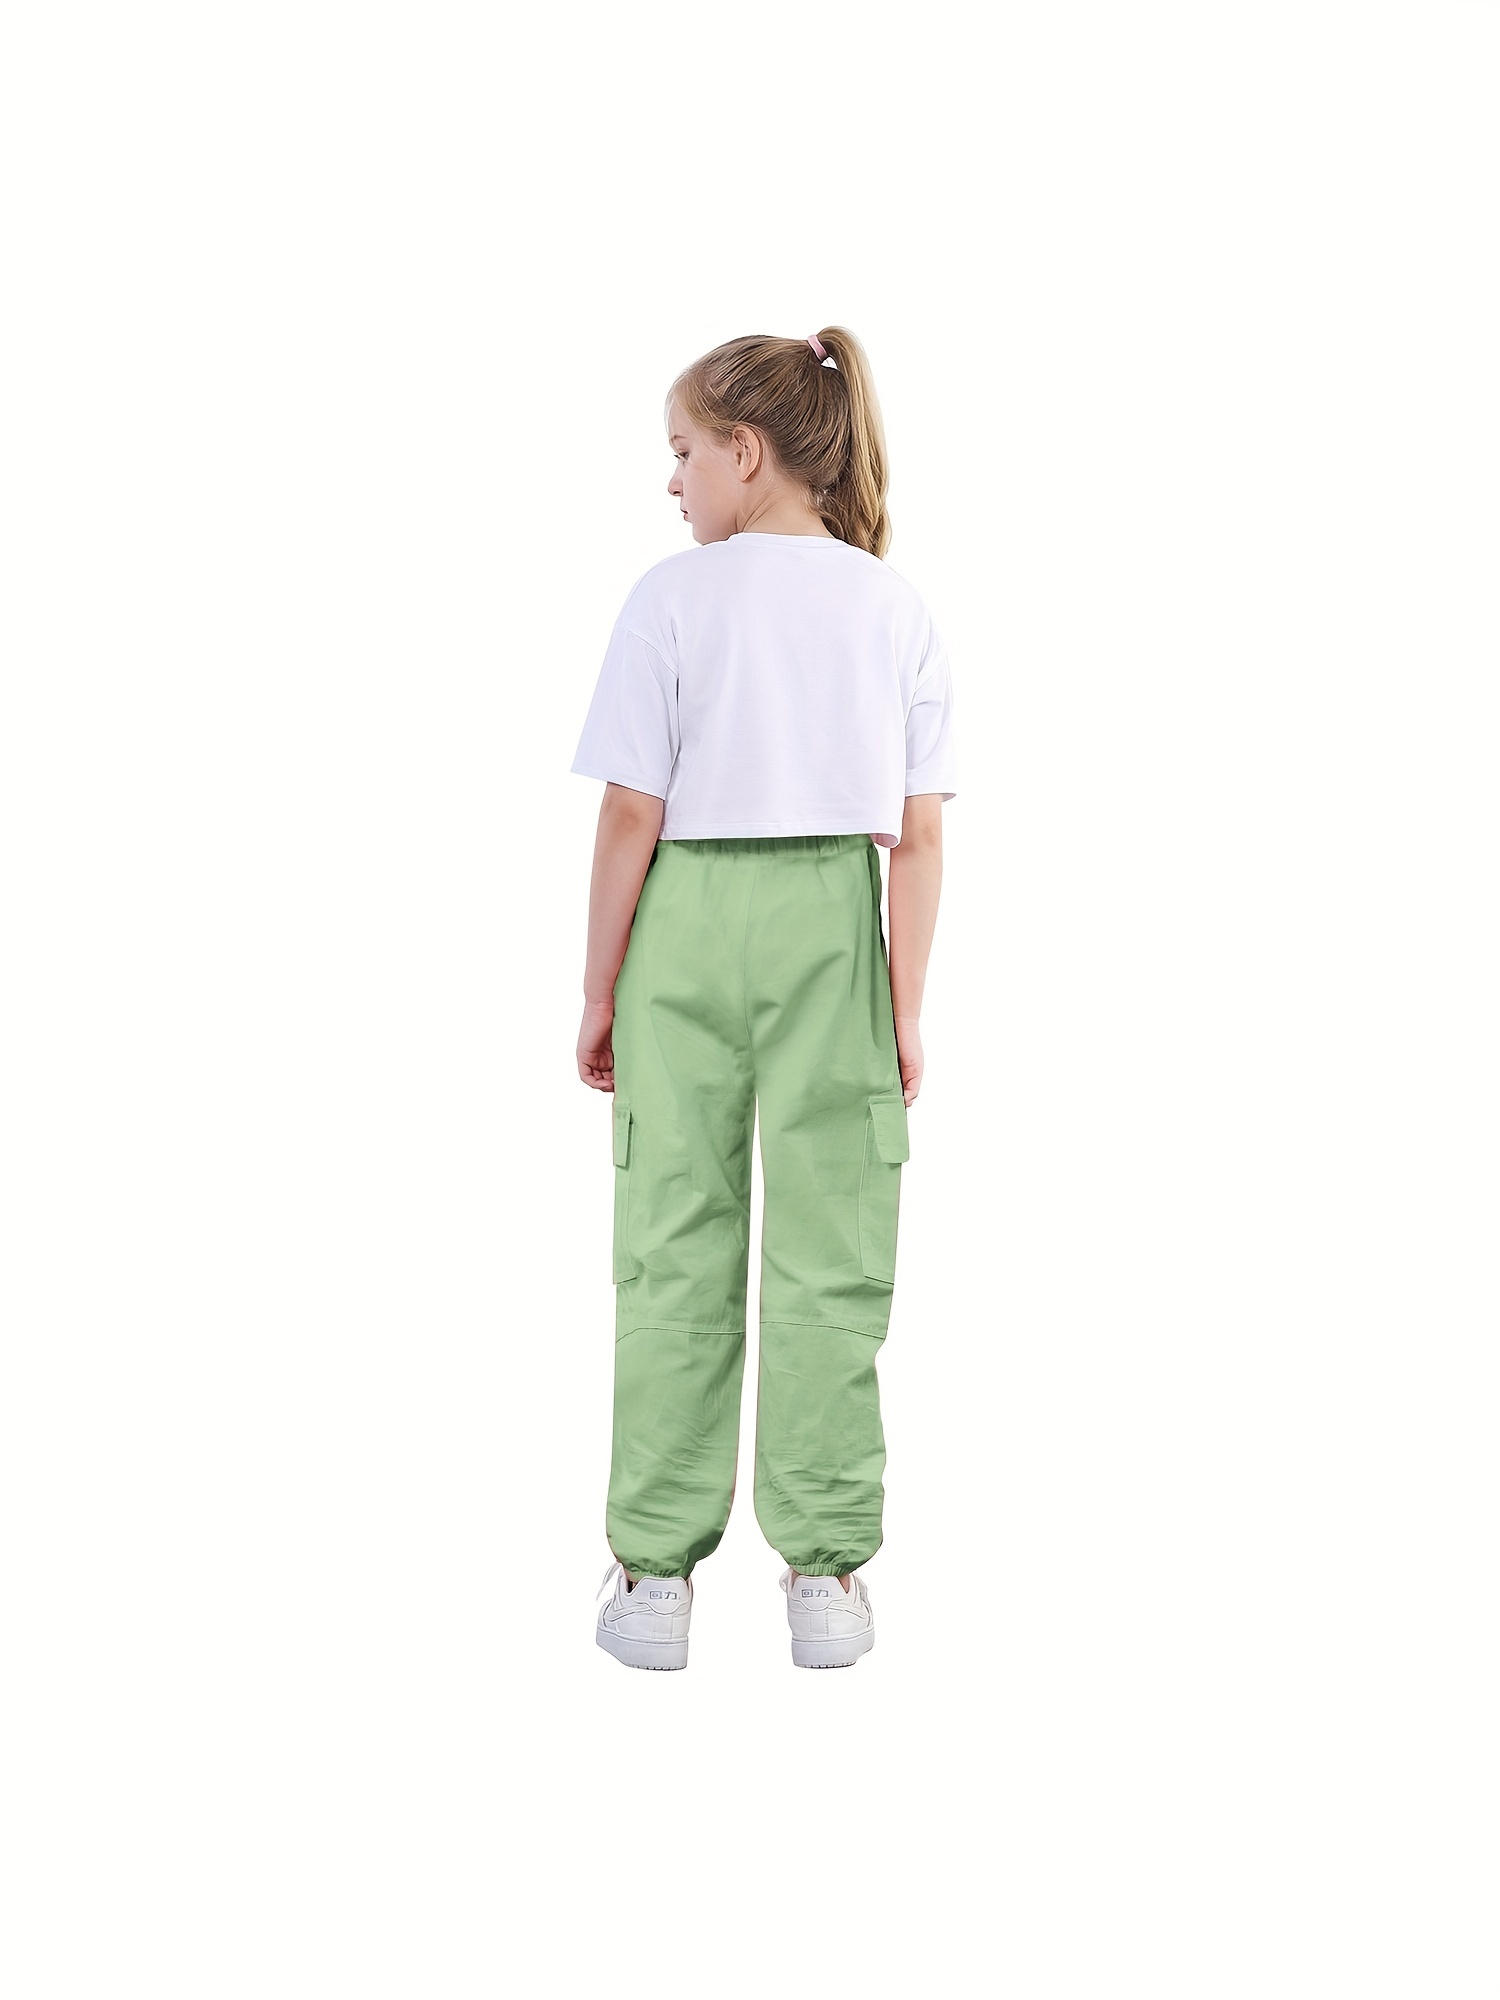  Cute Clothes For Teen Girls, Long Sleeve White Crop Tops Tee  Shirts + Green Cargo Jogger Pants Outfits 2pcs Clothes Set, 7-8 Years Tag  140